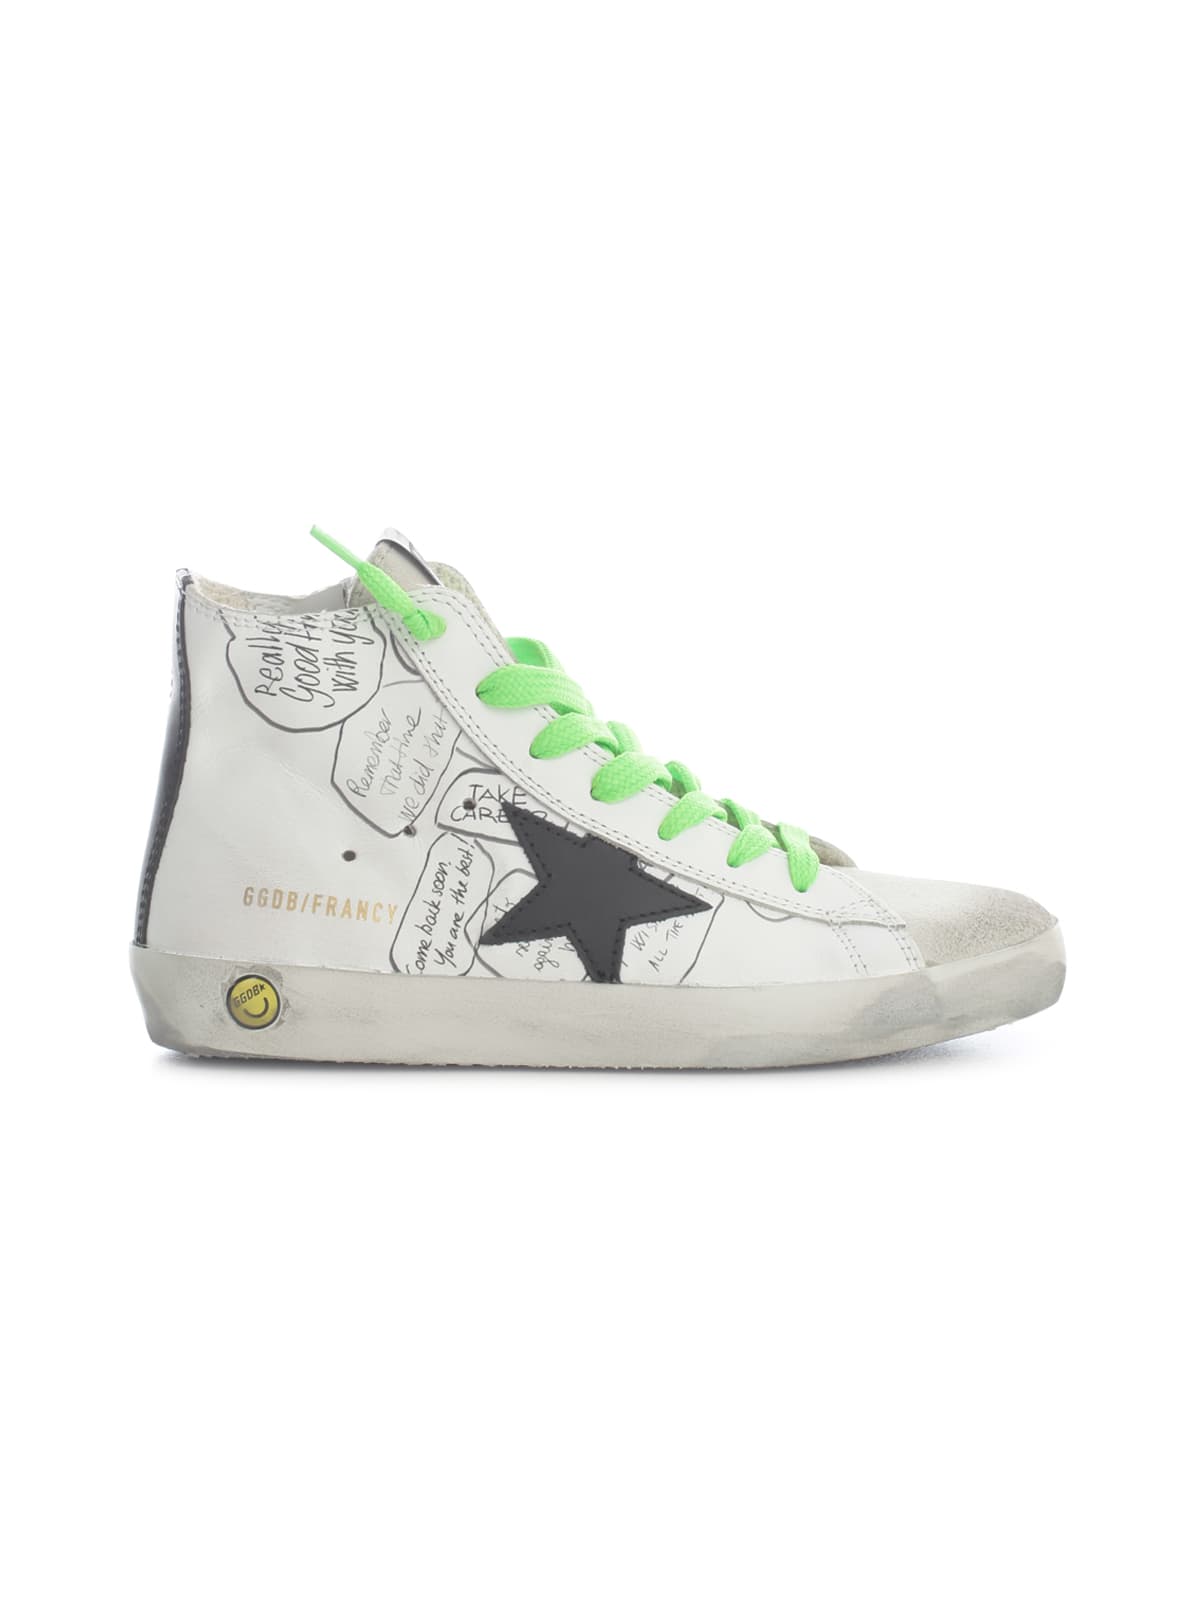 Golden Goose Francy Leather Signature Upper Leather Star Suede Toe